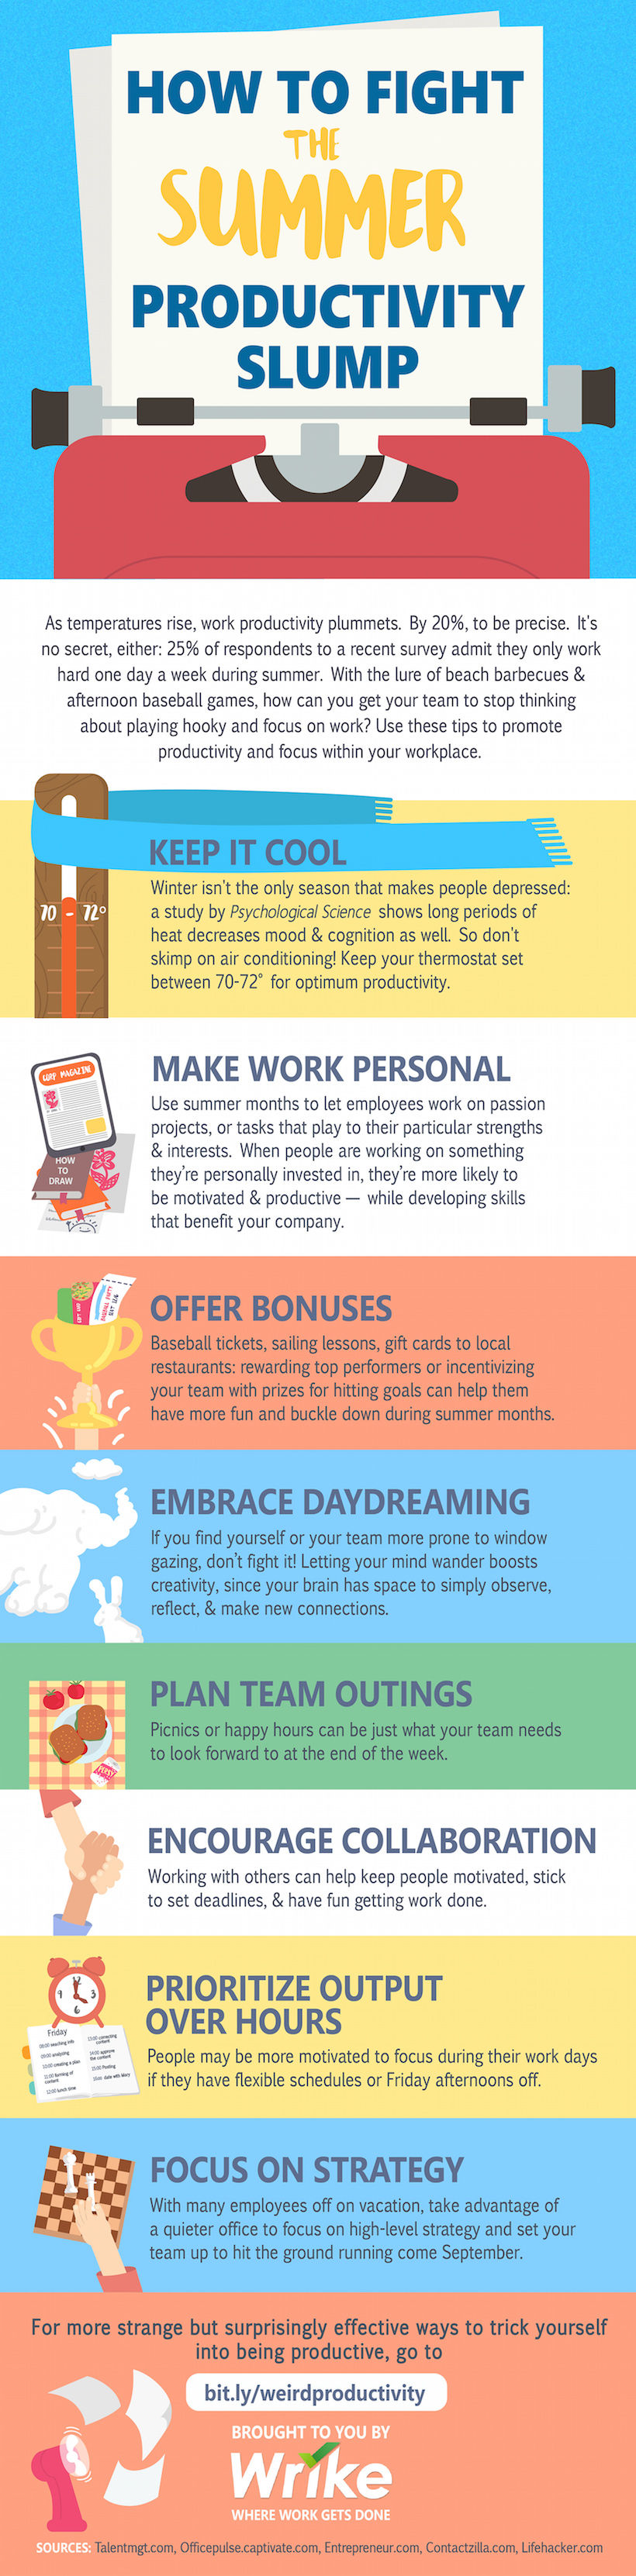 Tips to Get More Productivity in Summer